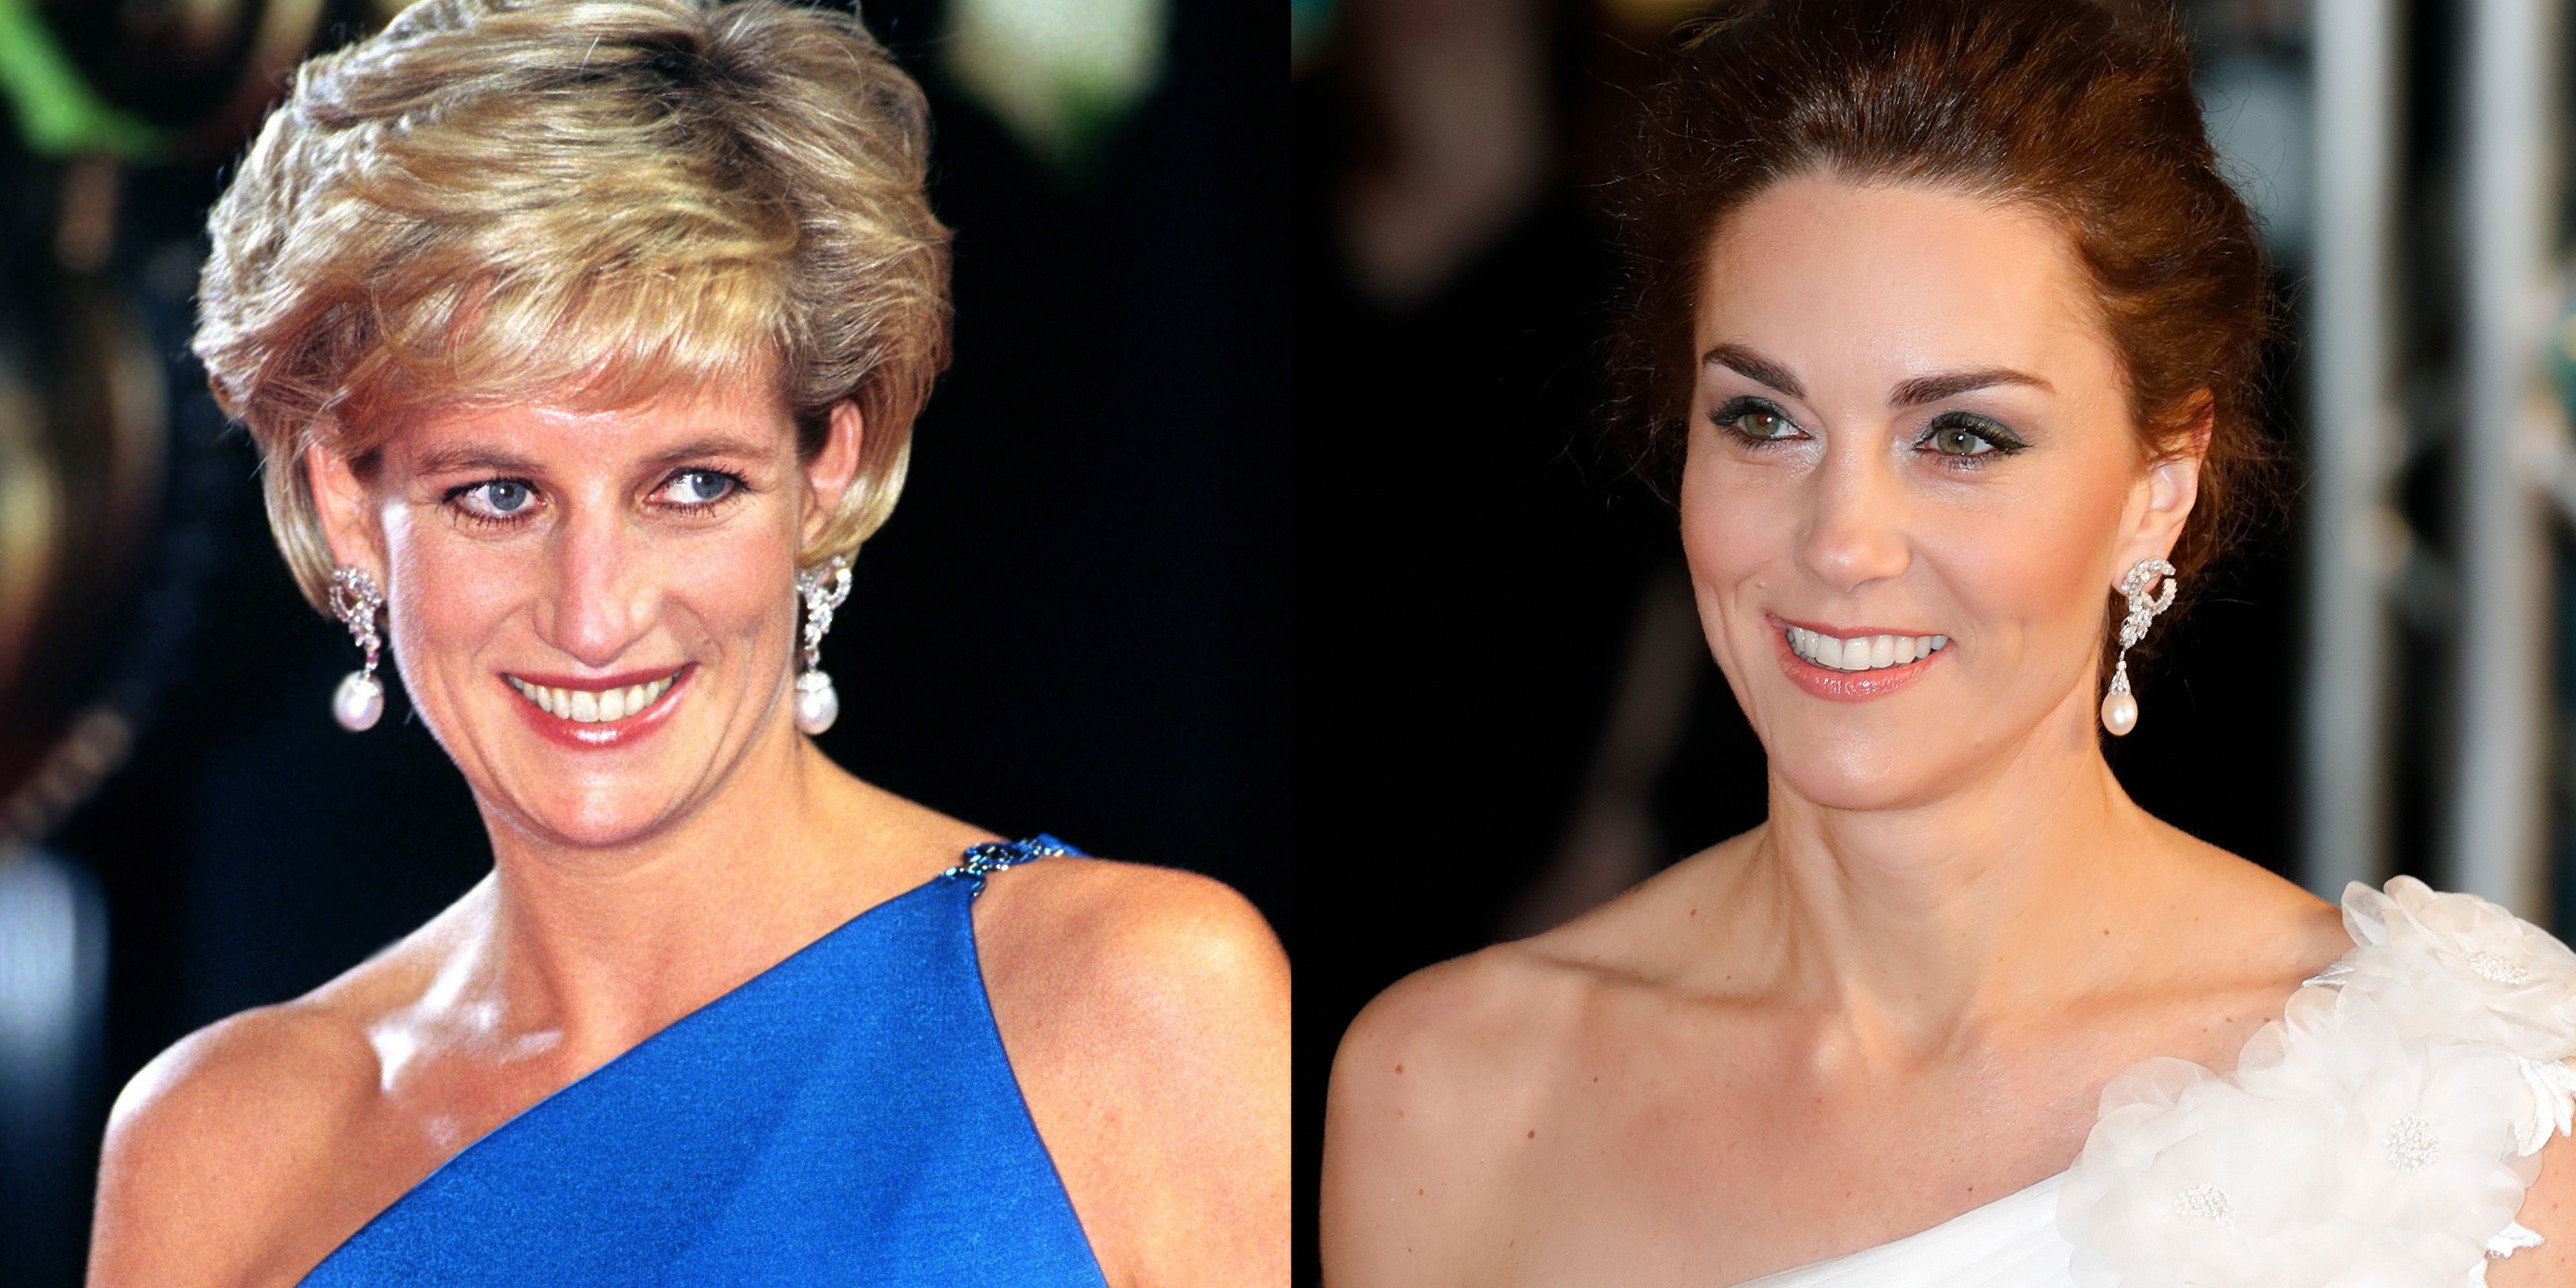 See How Kate Middleton Styled Princess Dianas Pearl and Diamond Earrings  at the BAFTAs